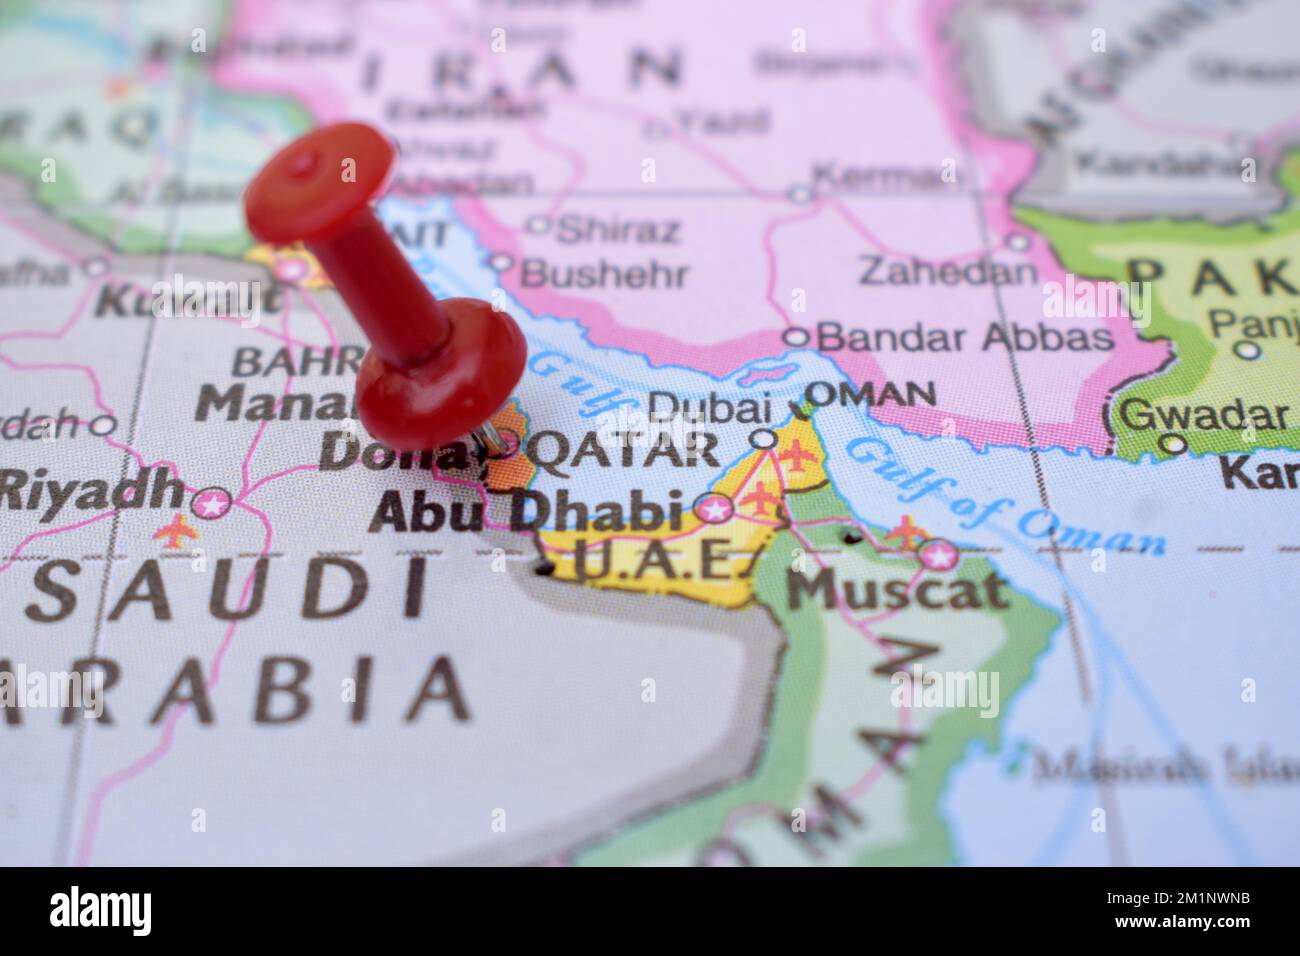 Red Push Pin Pointing on Location of Qatar World Map Close-Up View Stock Photograph Stock Photo